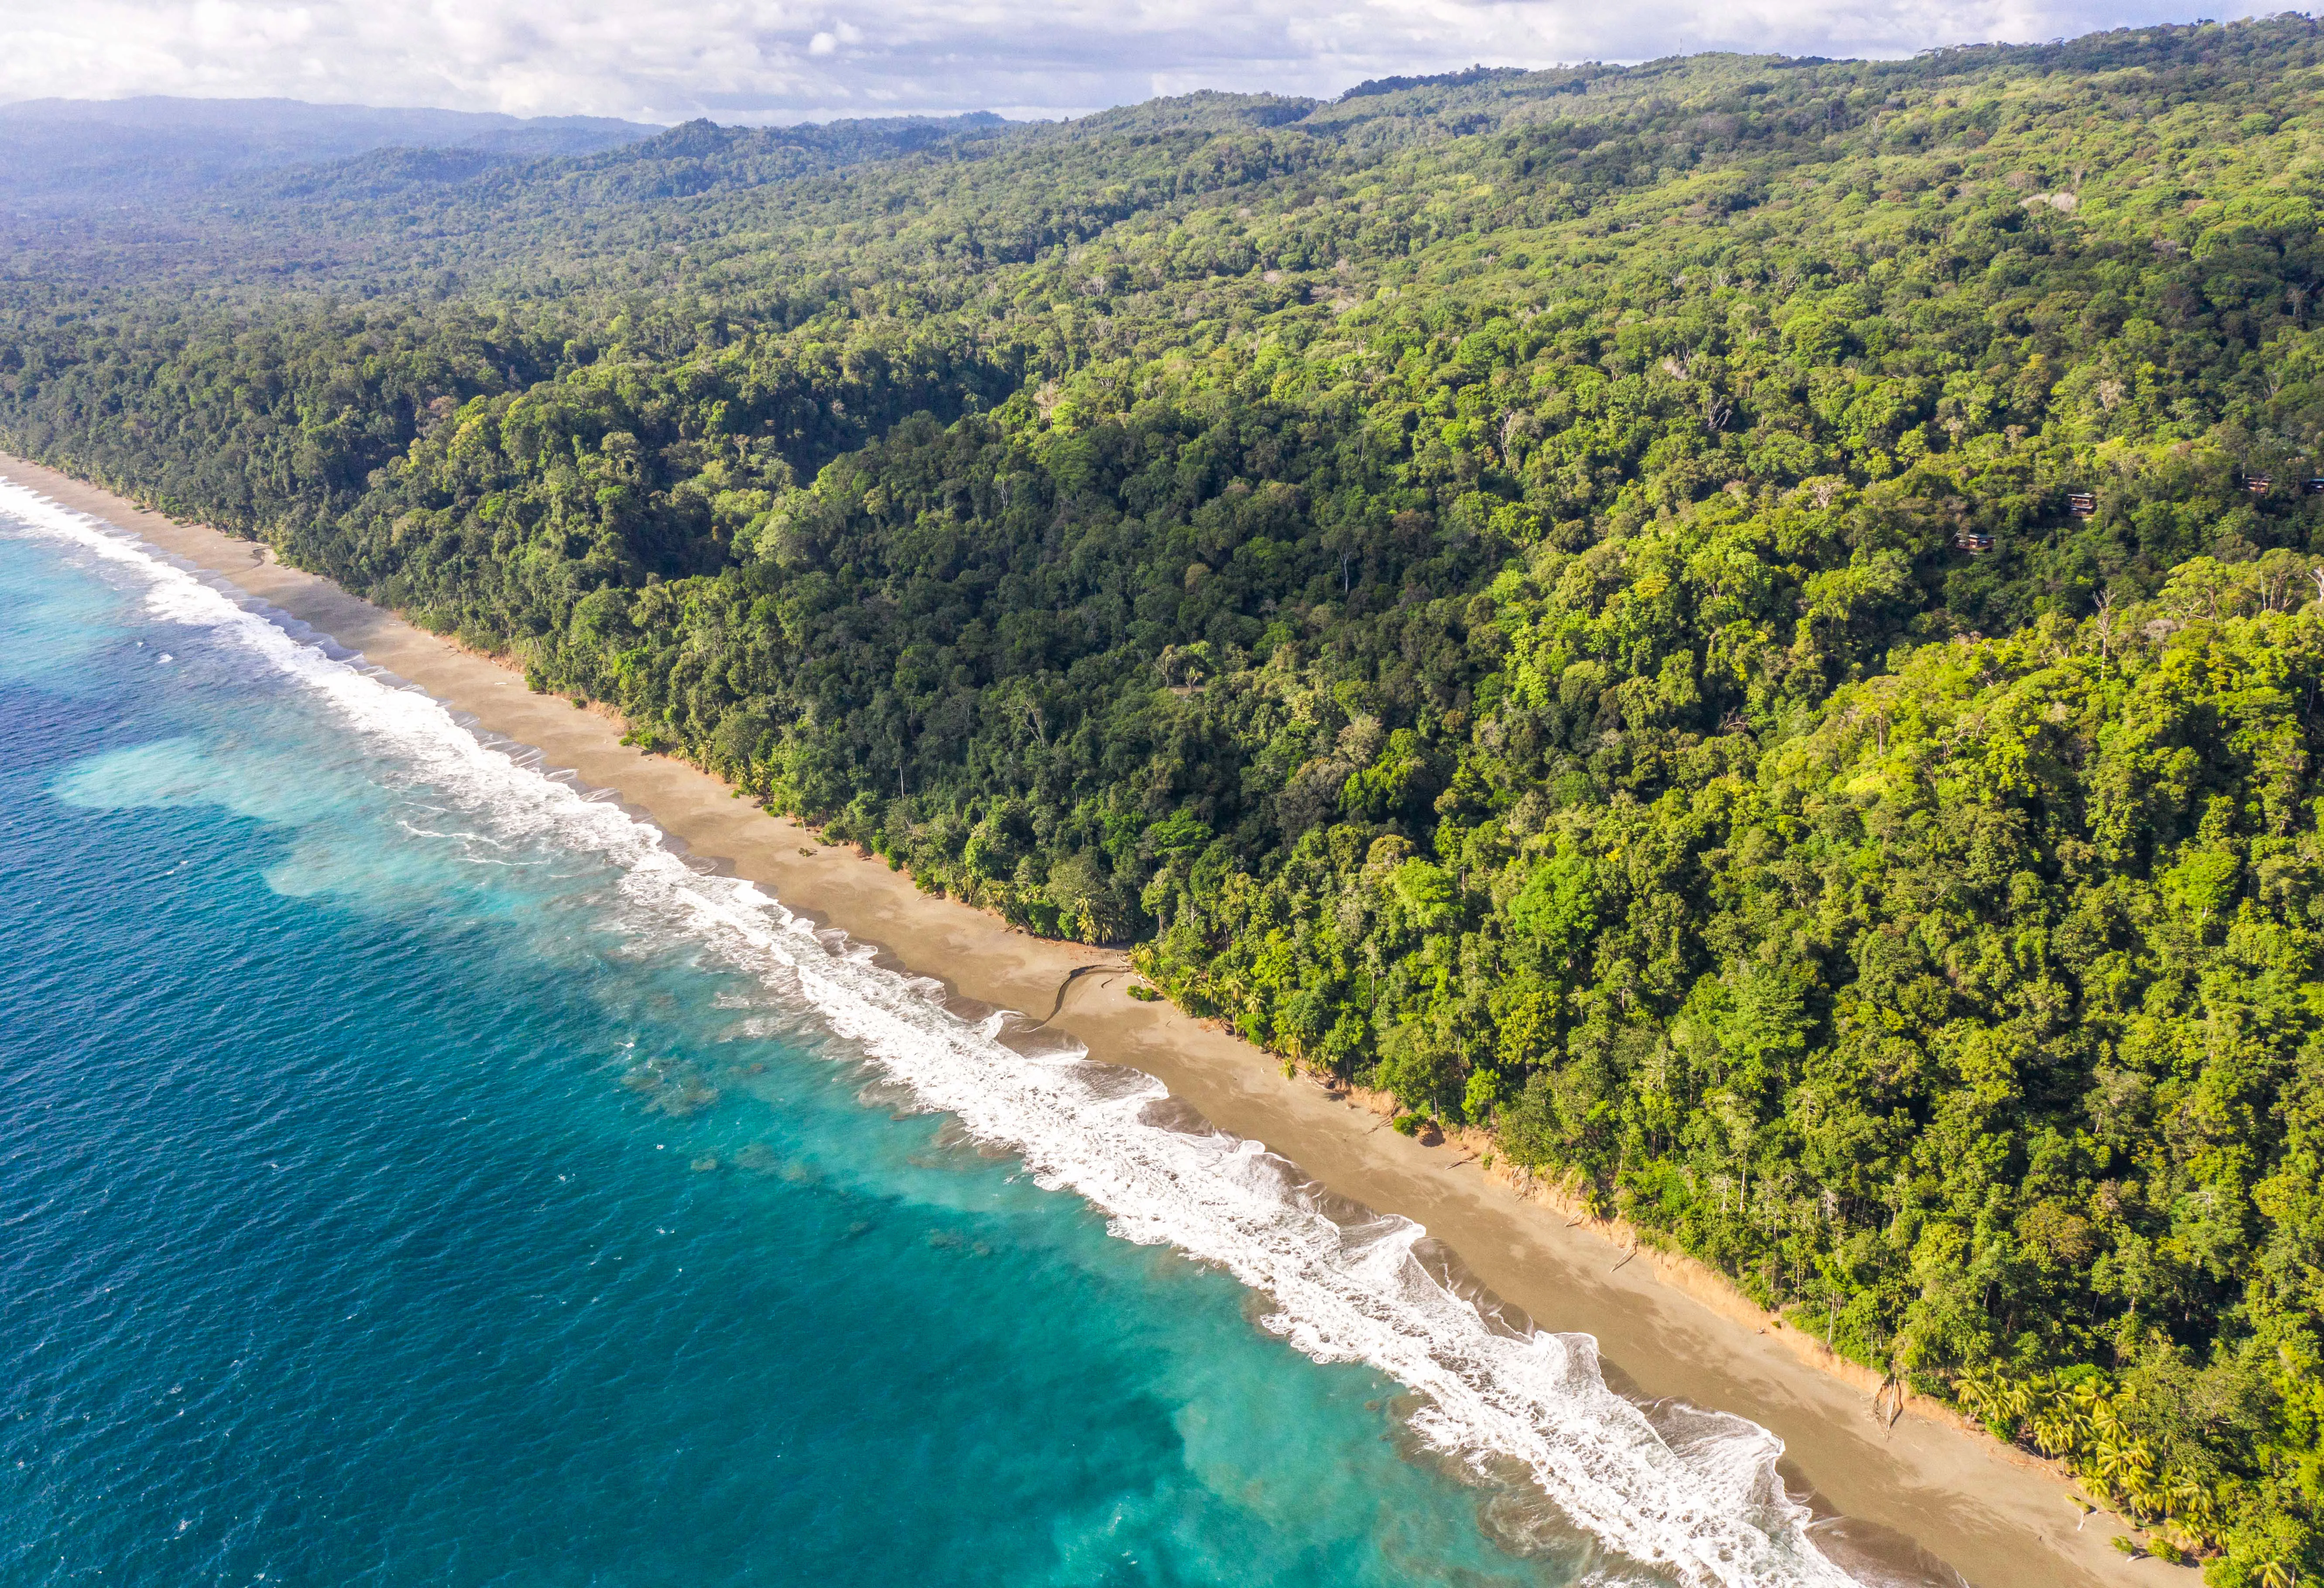 Where the rain forest meets the ocean, an authentic Costa Rican experience